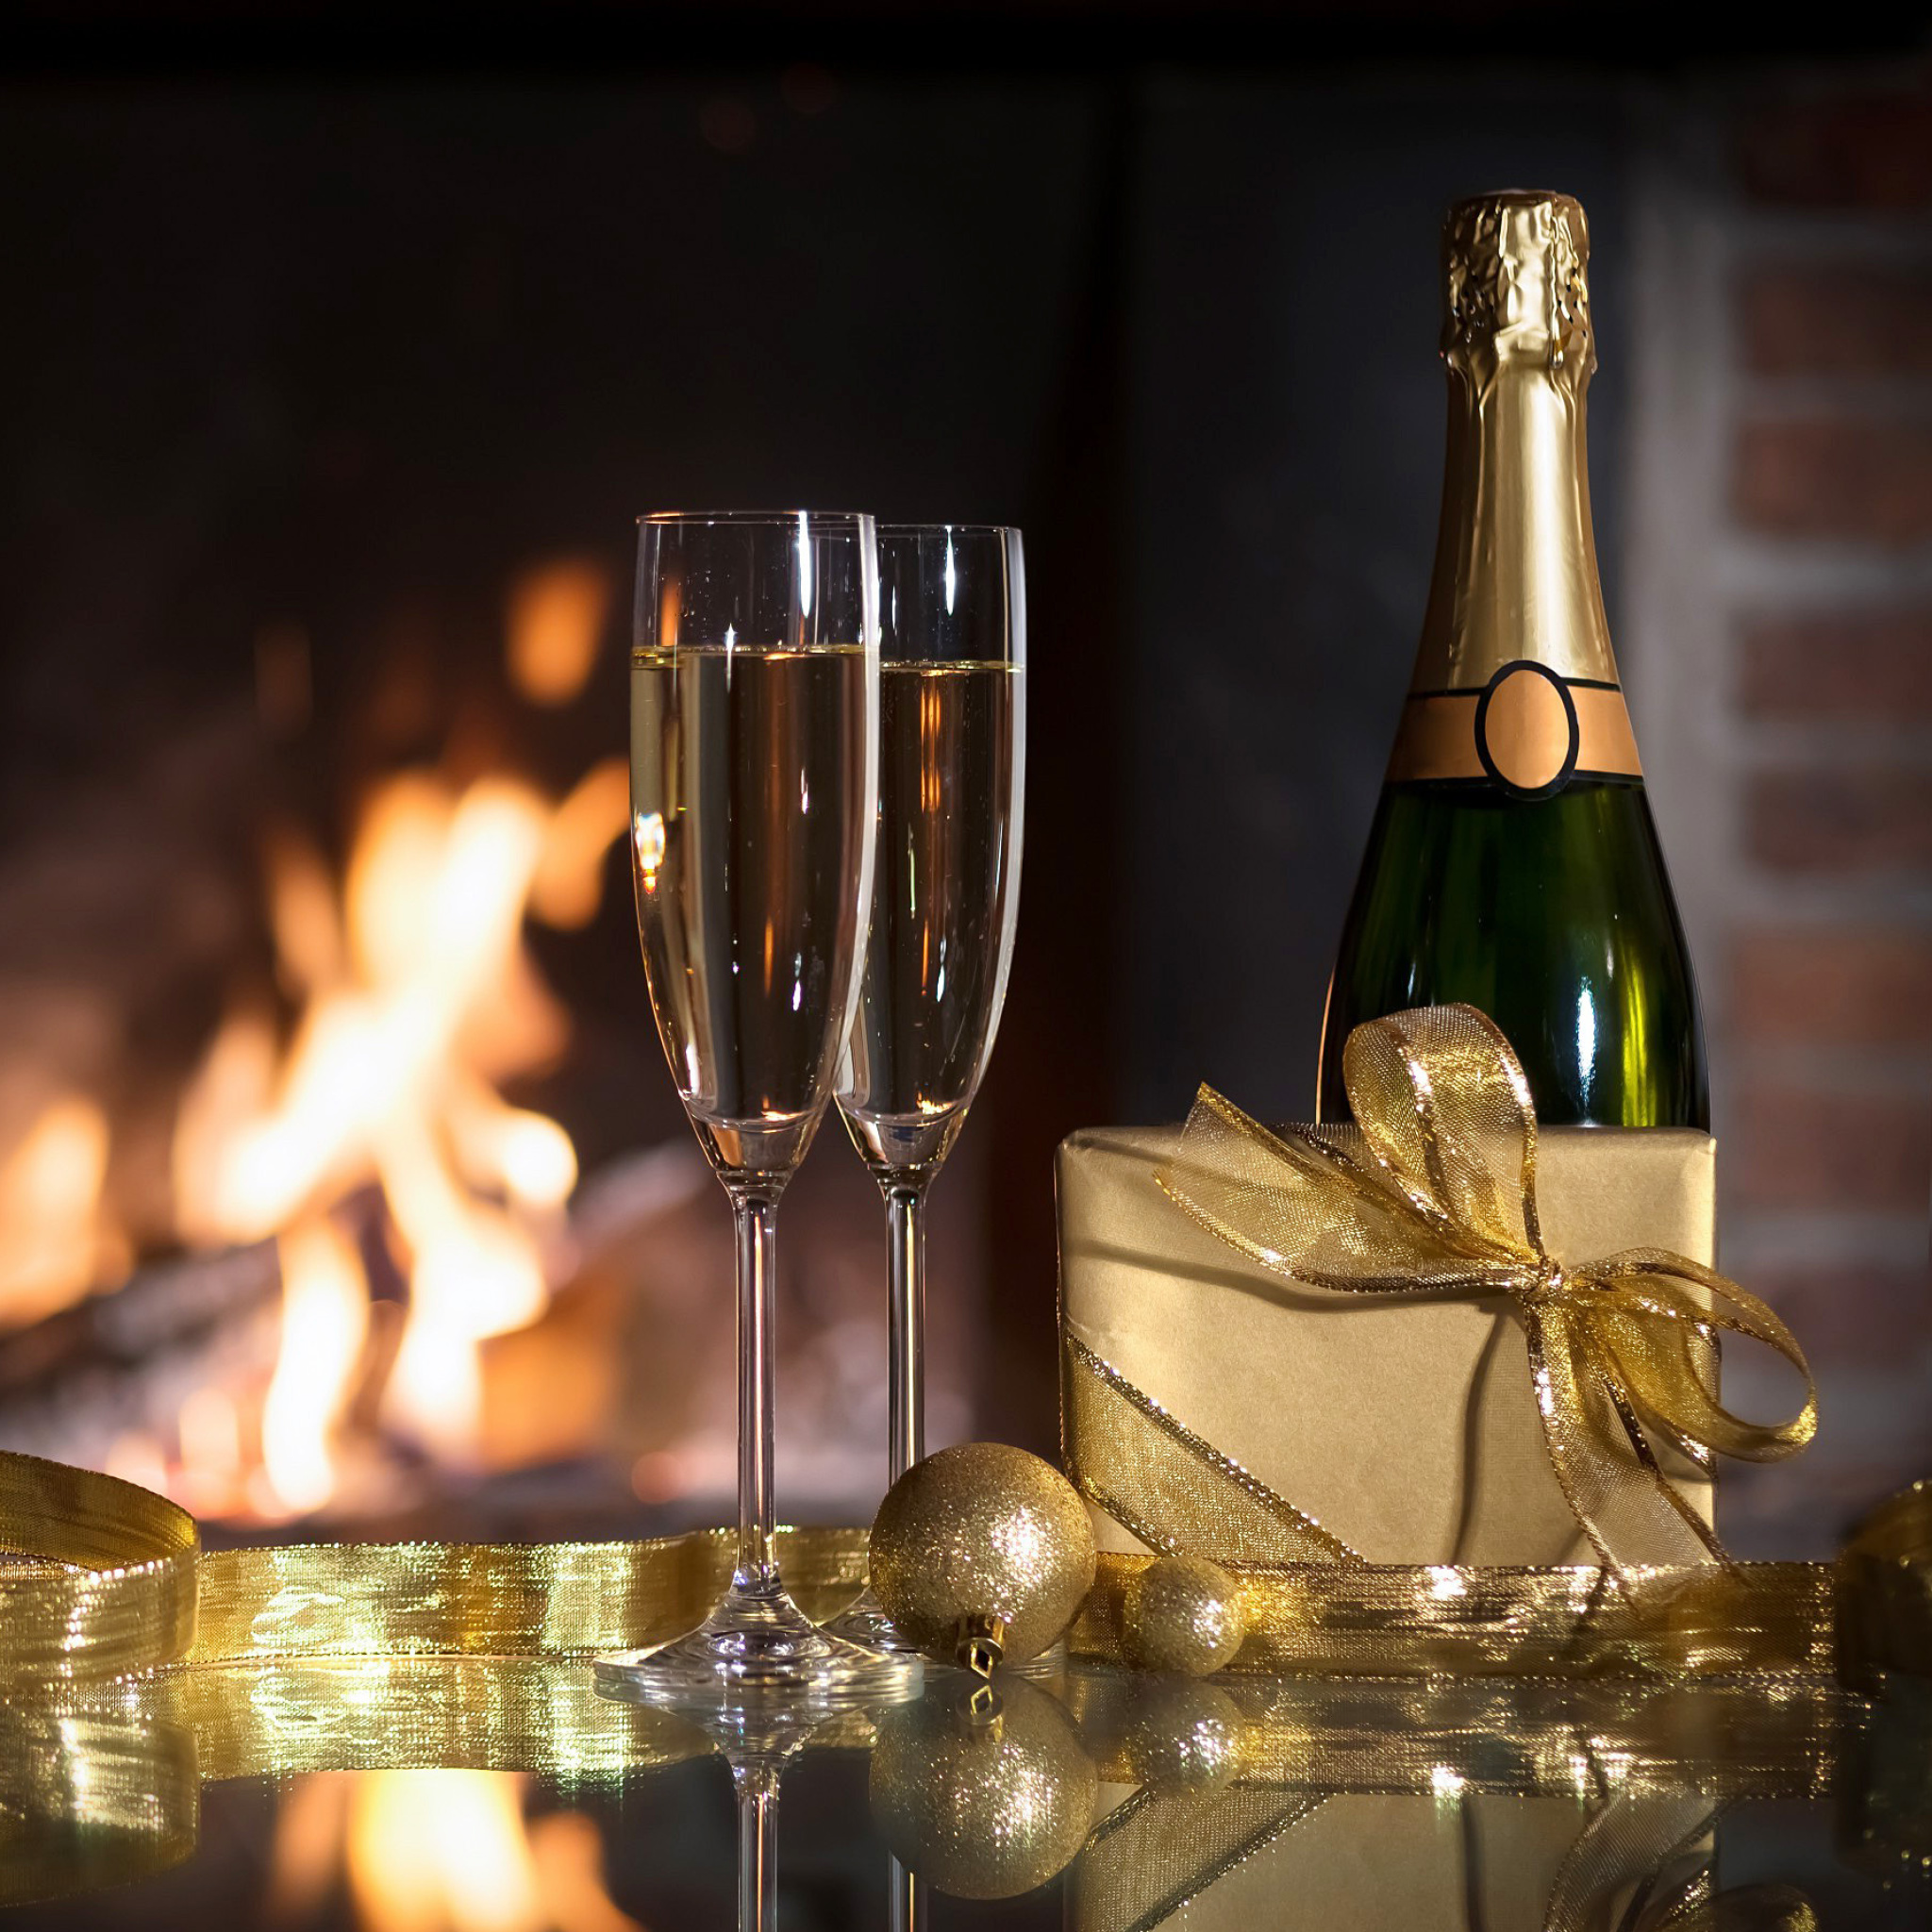 Das Champagne and Fireplace Wallpaper 2048x2048